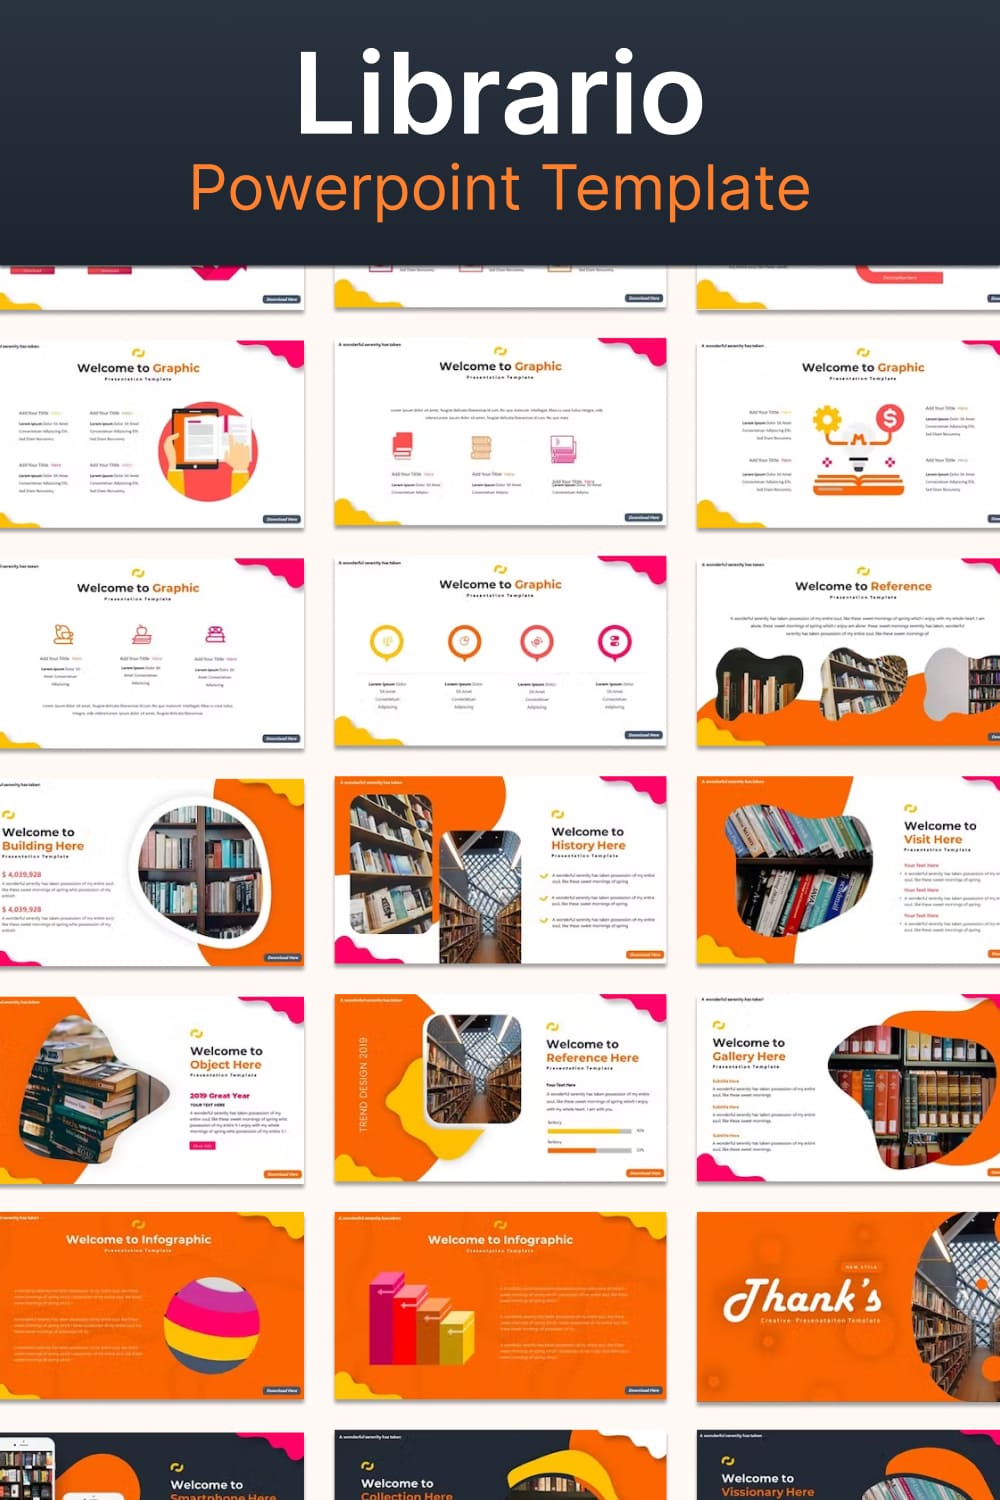 Librario powerpoint template - pinterest image preview.